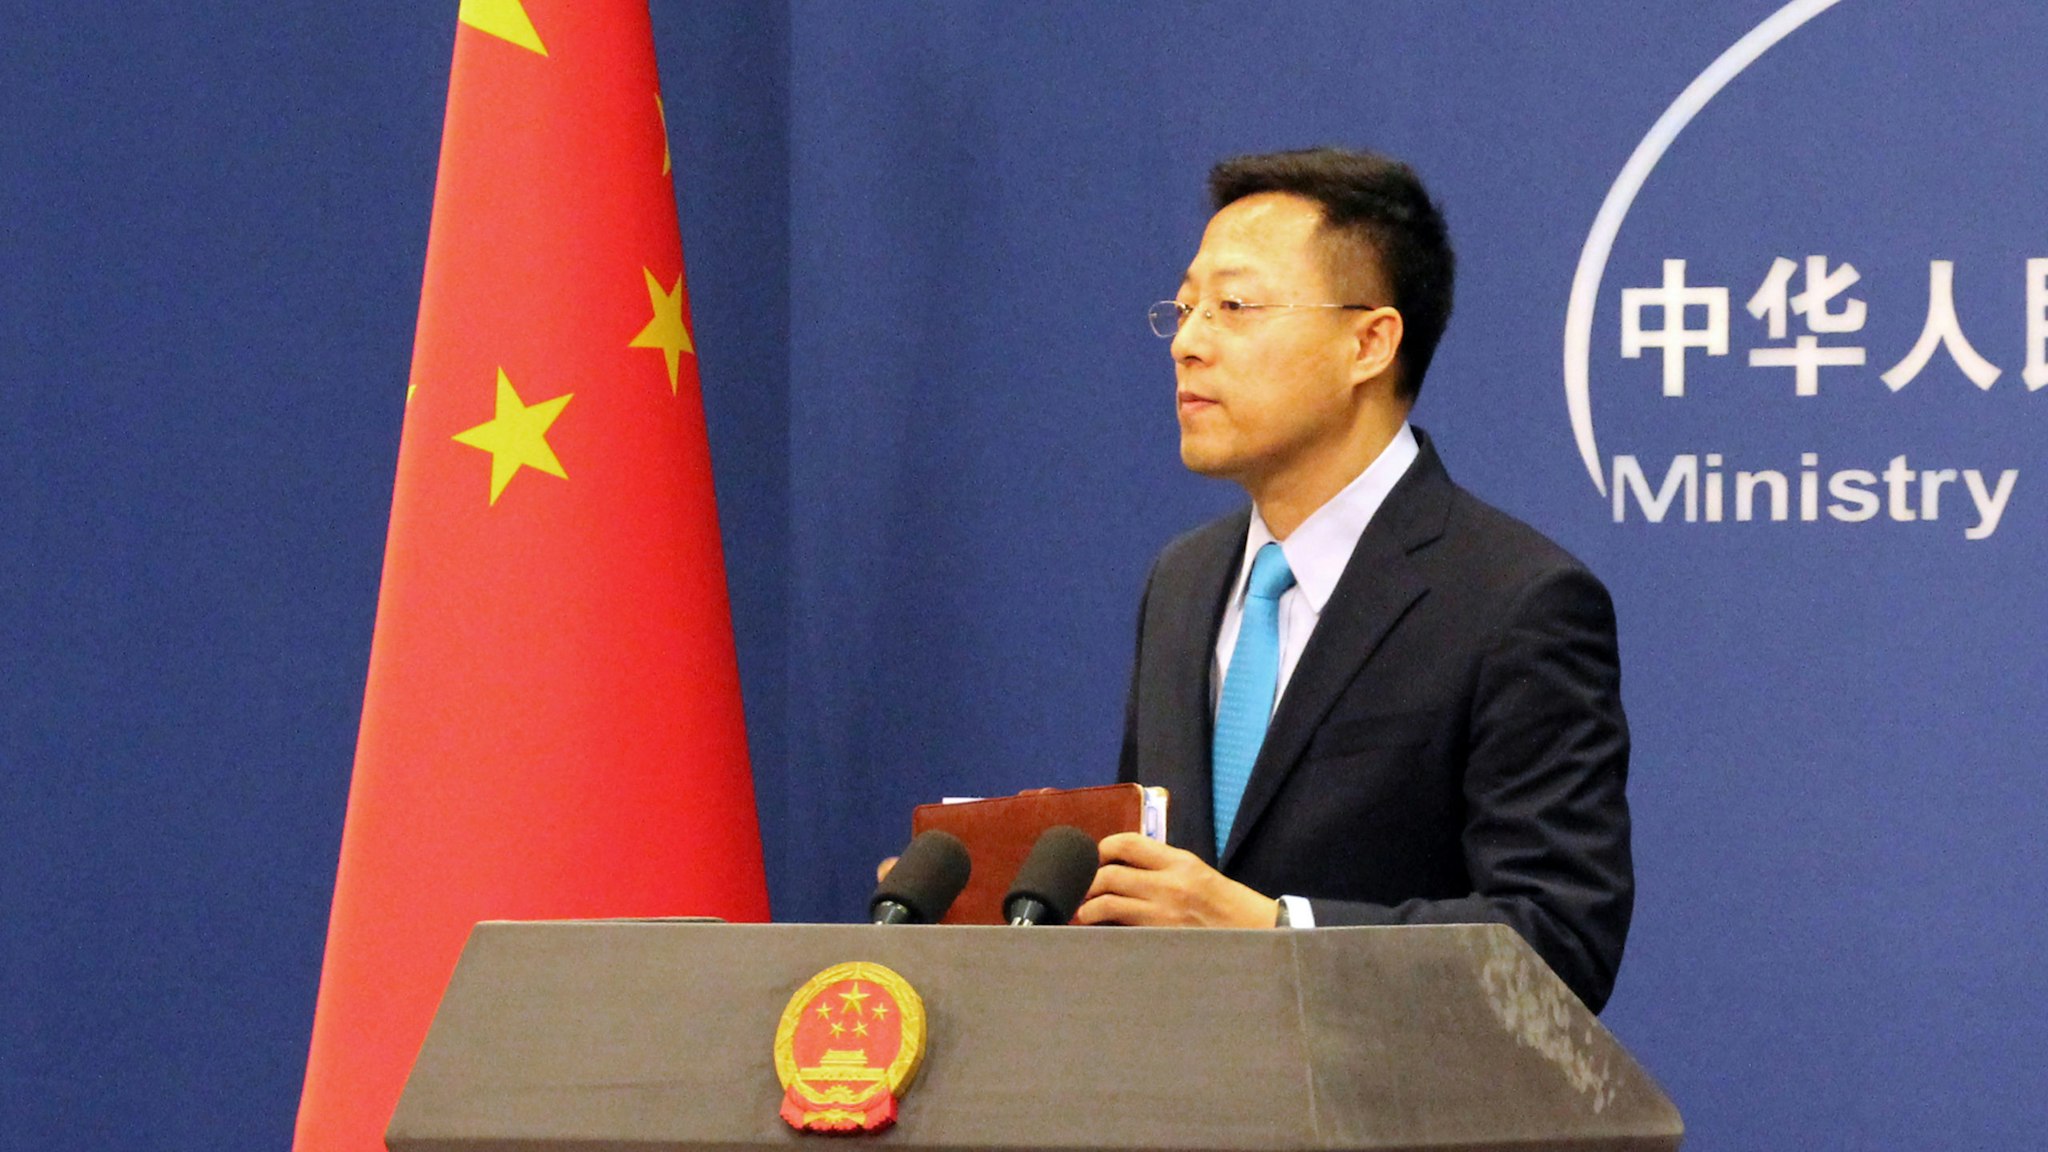 BEIJING, CHINA - FEBRUARY 24, 2020: Chinese Foreign Ministry Spokesman Zhao Lijian during his first regular press briefing at the Chinese Foreign Ministry; on February 3-21, the Ministry's regular briefings were held online amid the COVID-19 coronavirus outbreak.